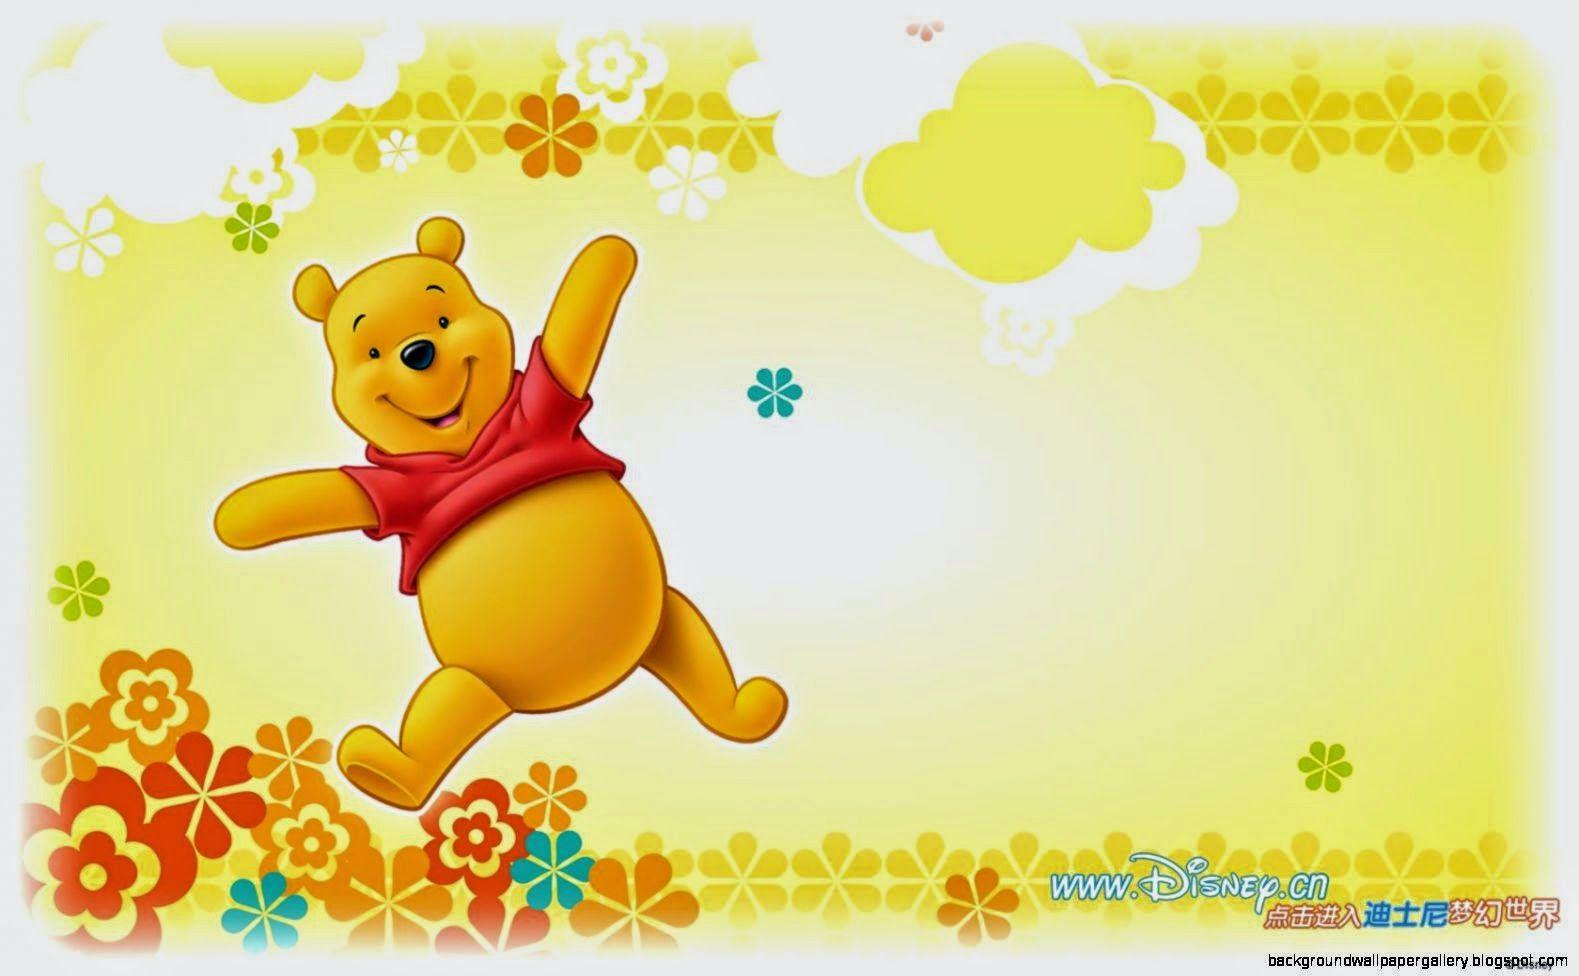 Wallpaper HD Winnie The Pooh Baby. Background Wallpaper Gallery